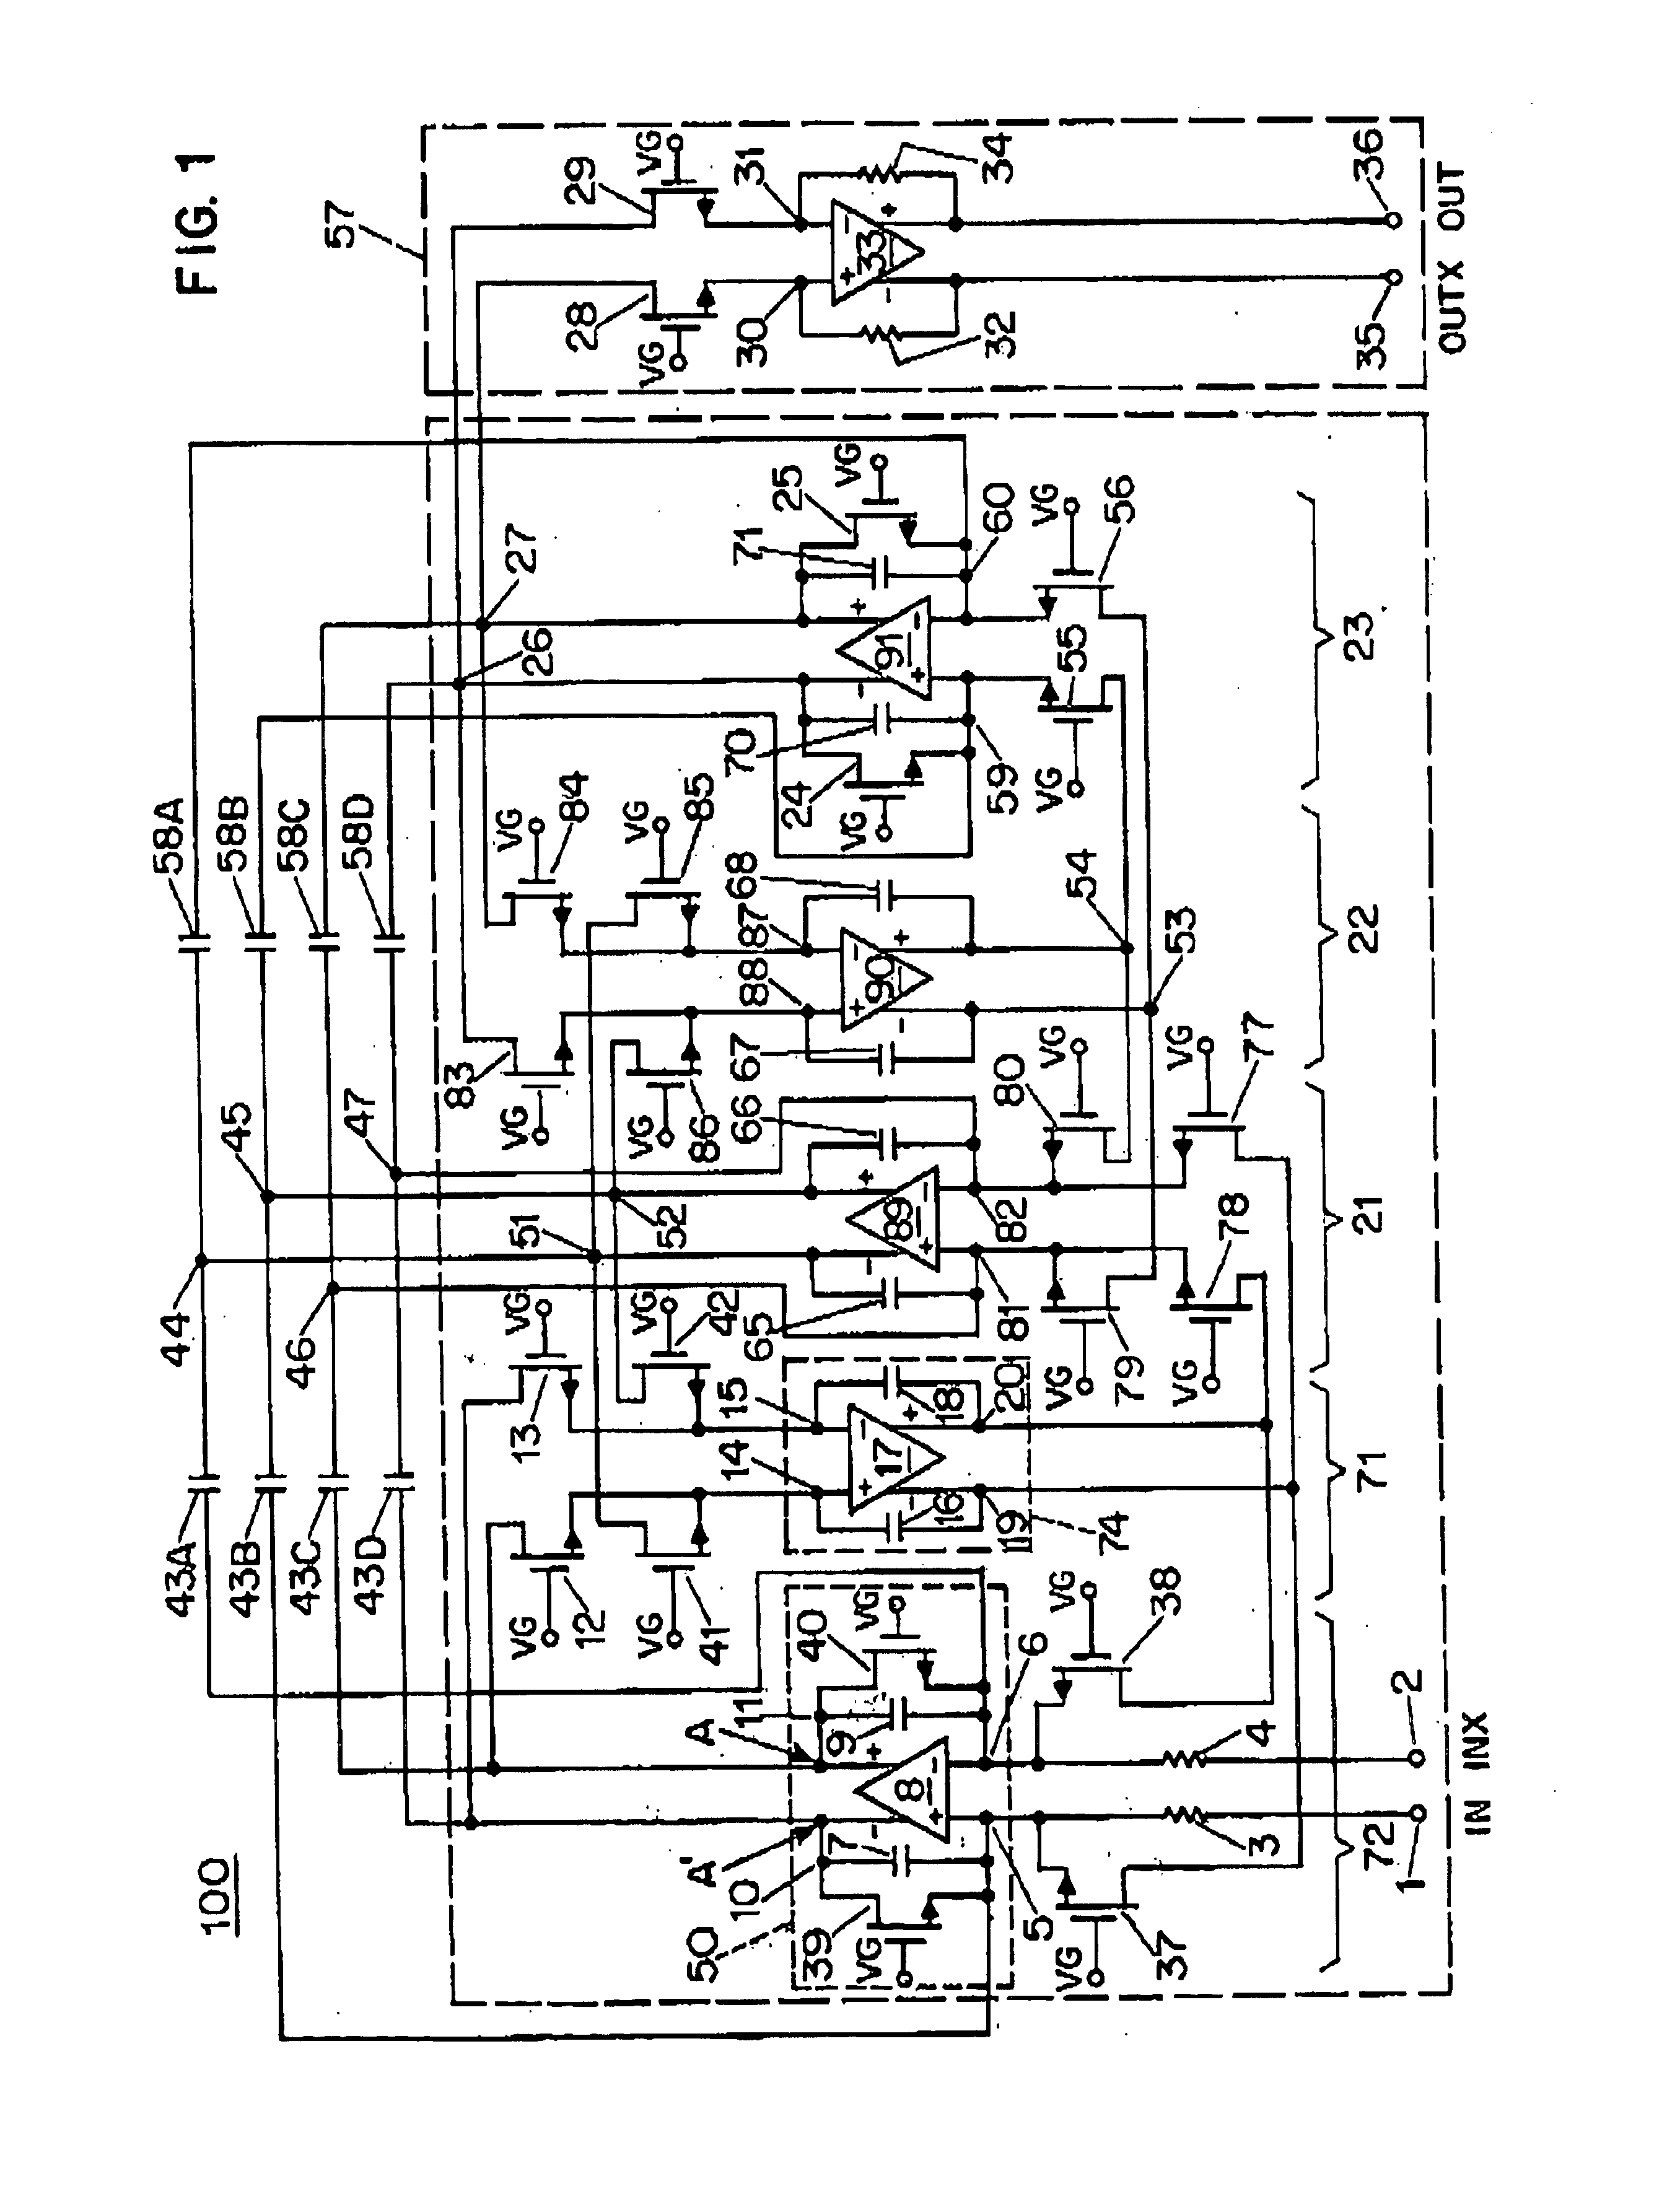 Active continuous-time filter with increased dynamic range in the presence of blocker signals